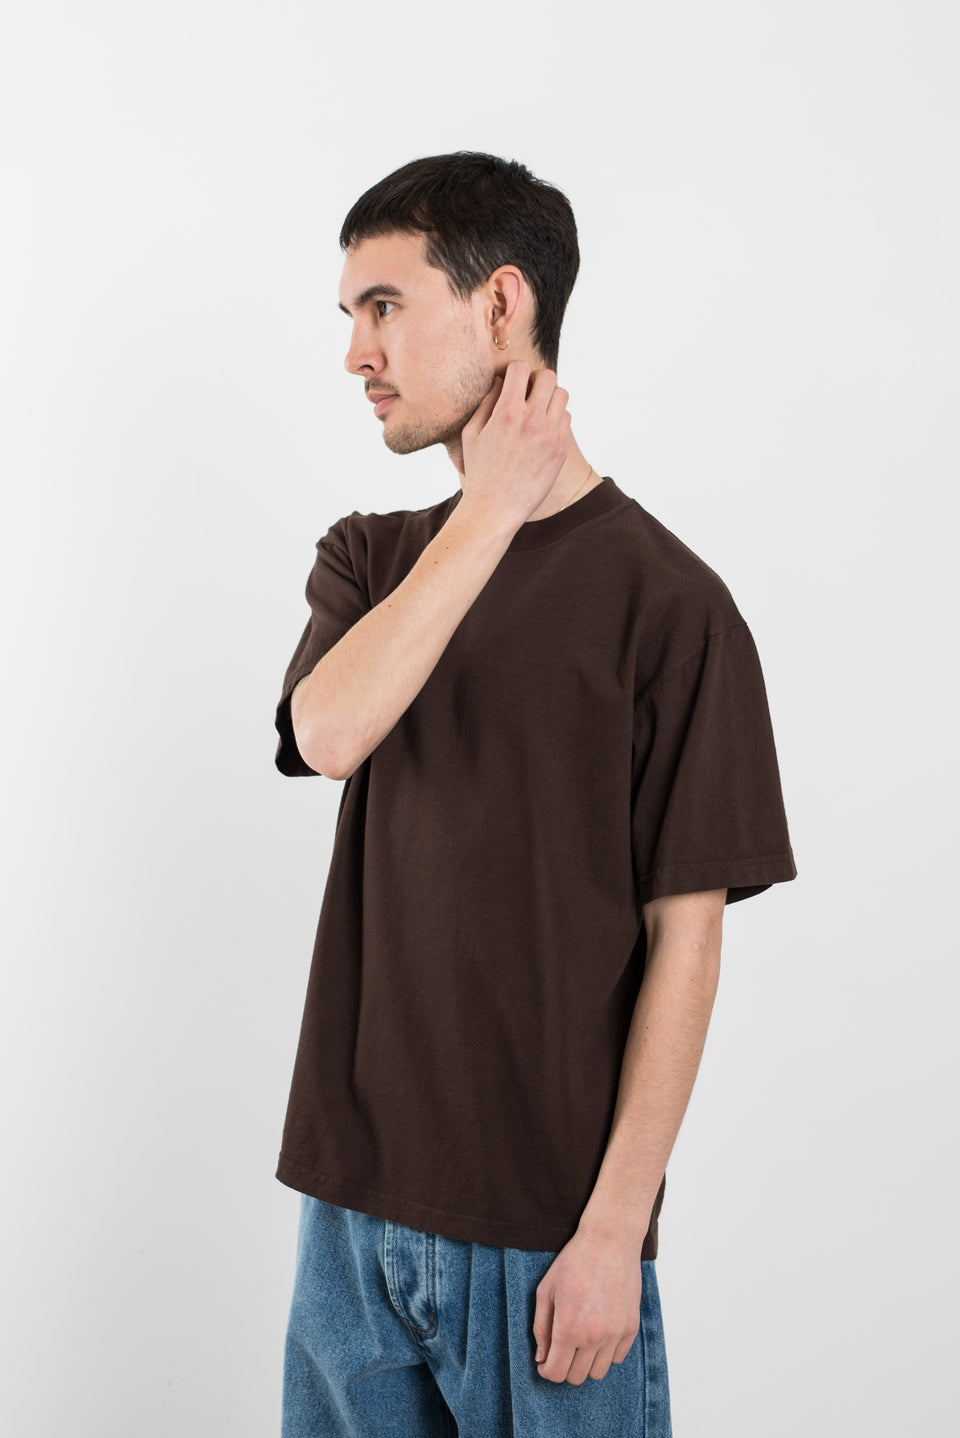 Calculuss Garment Dyed Tee Chocolate Brown Calculus Victoria BC Canada